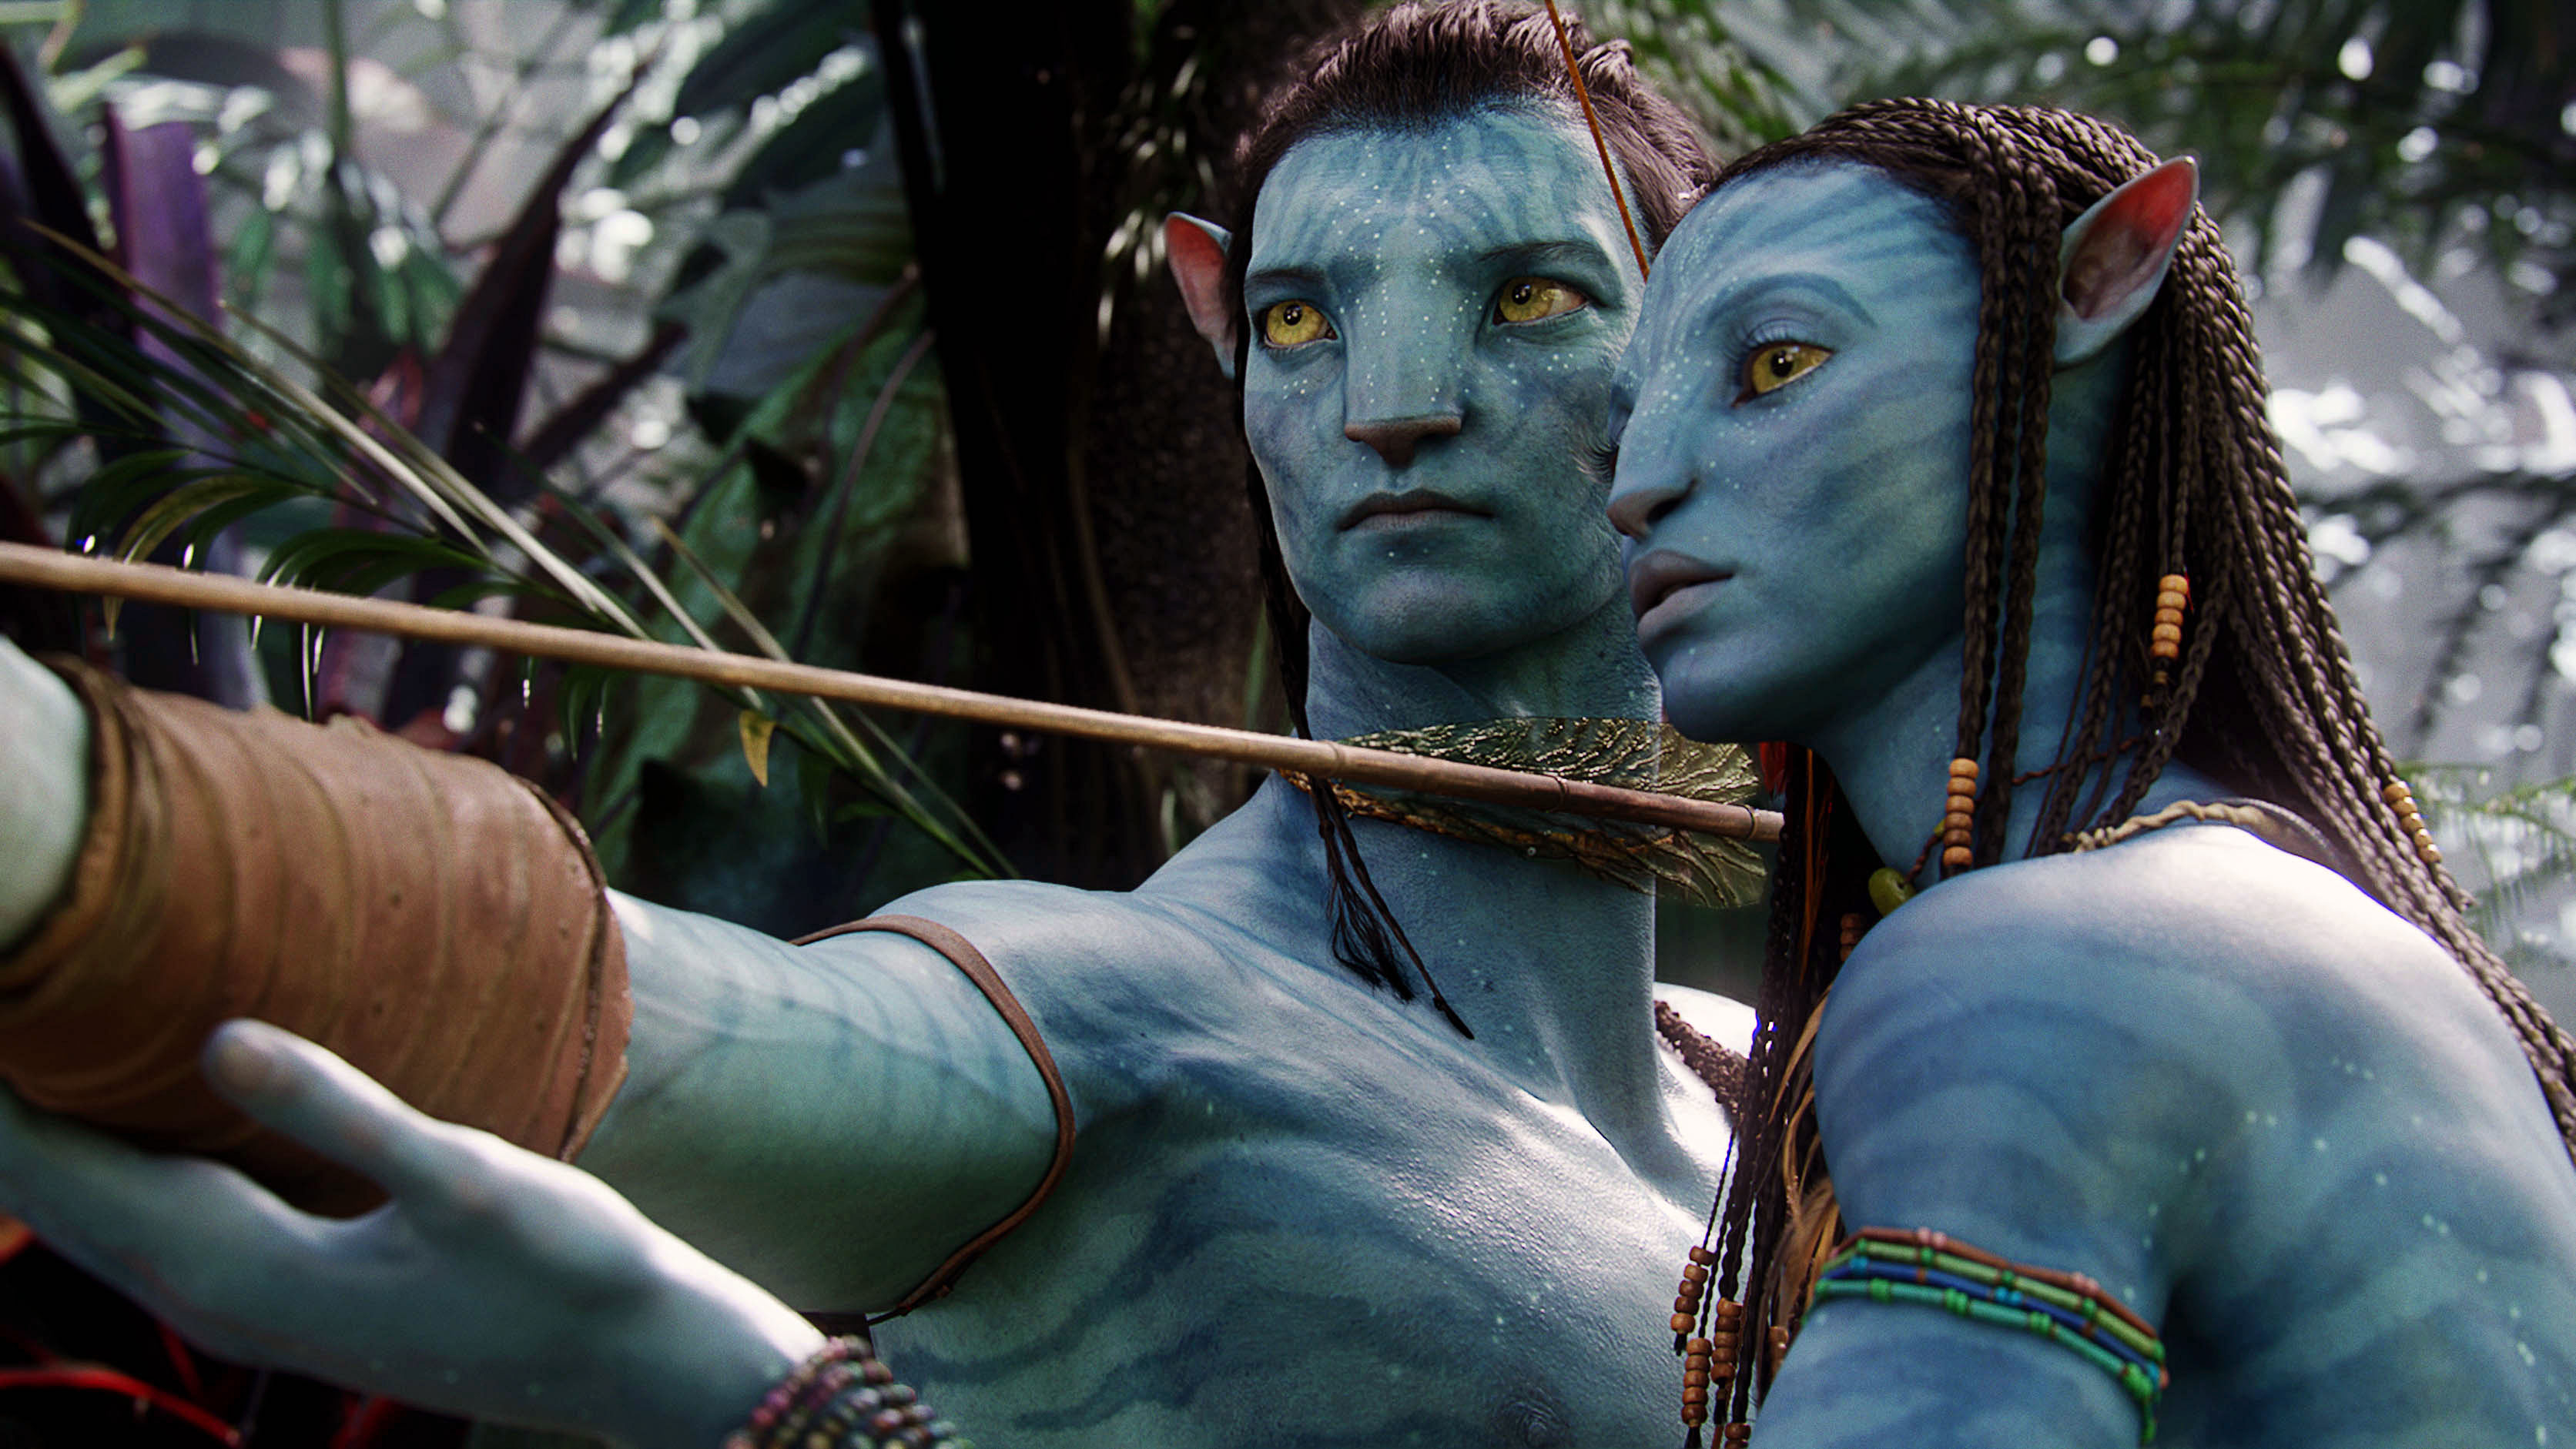 Two characters from Avatar, a male and a female, holding a bow together